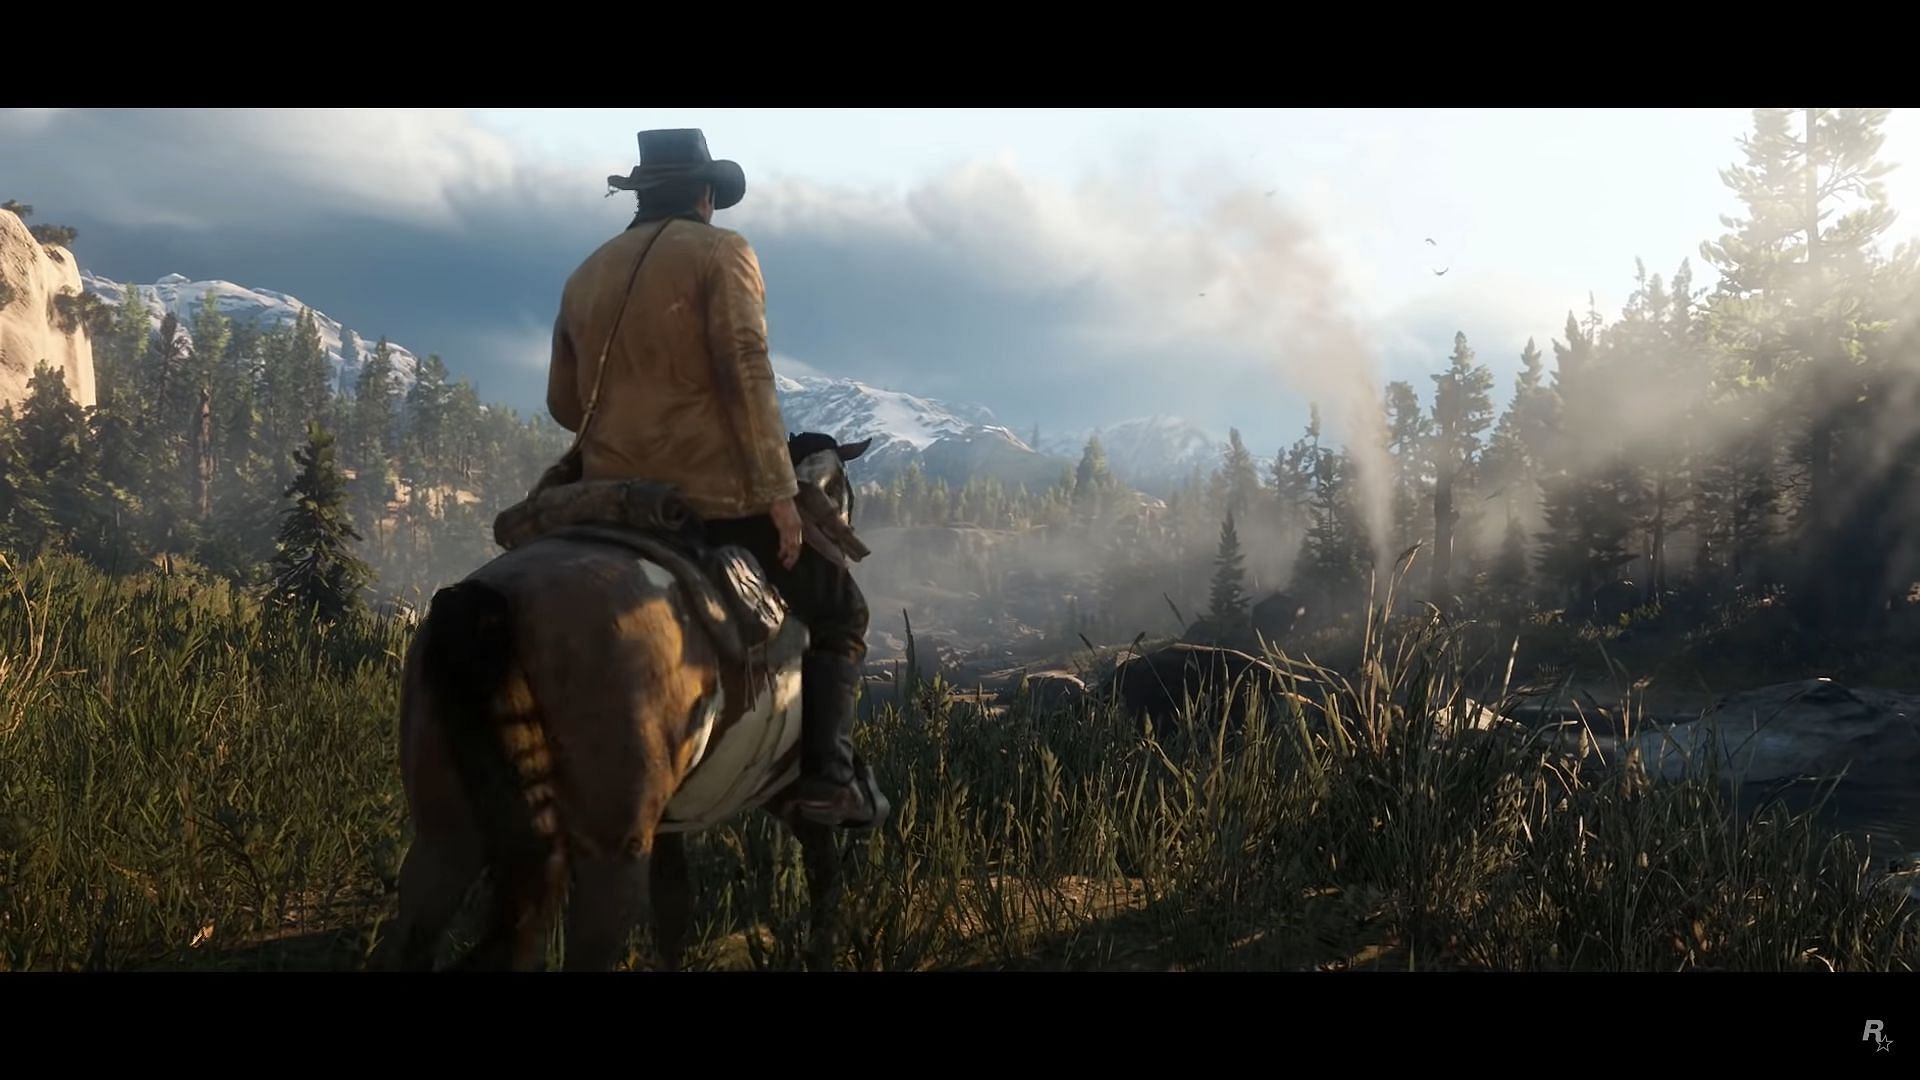 Riding out (Image via Red Dead Redemption 2)